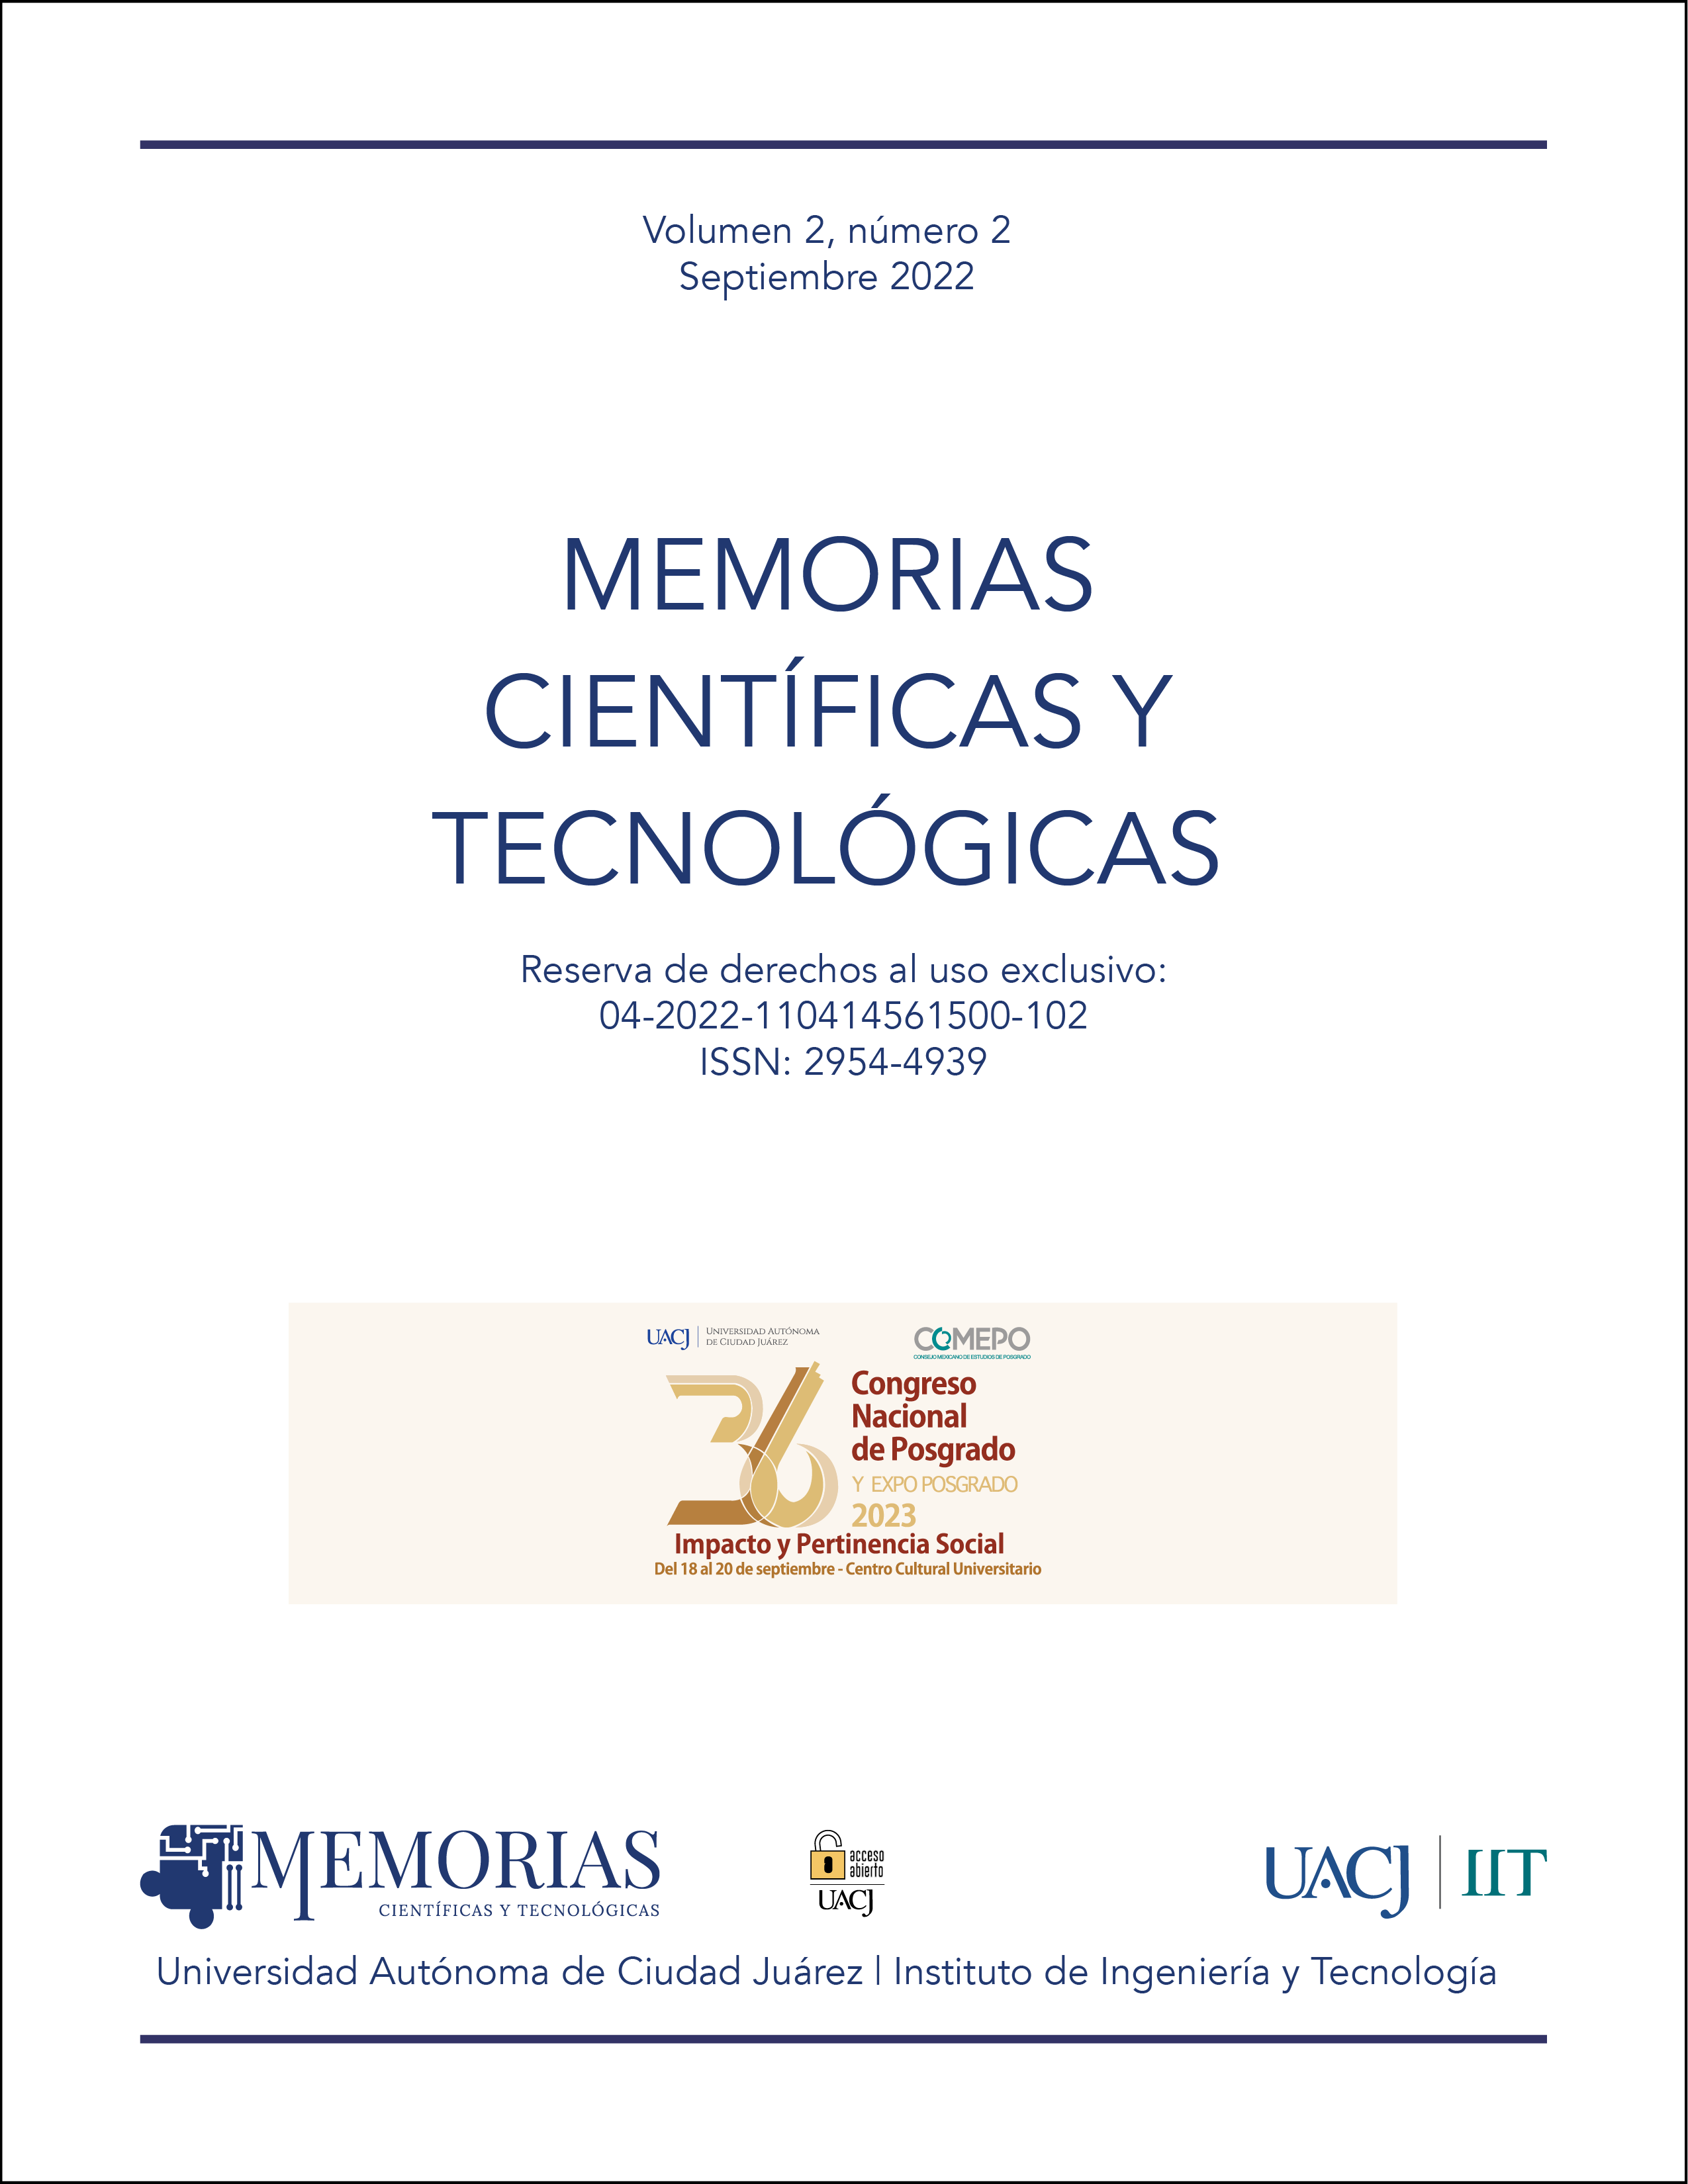 Strategies oriented to social impact through the graduate program of Studies and Creative Processes in Art and Design at the UACJ